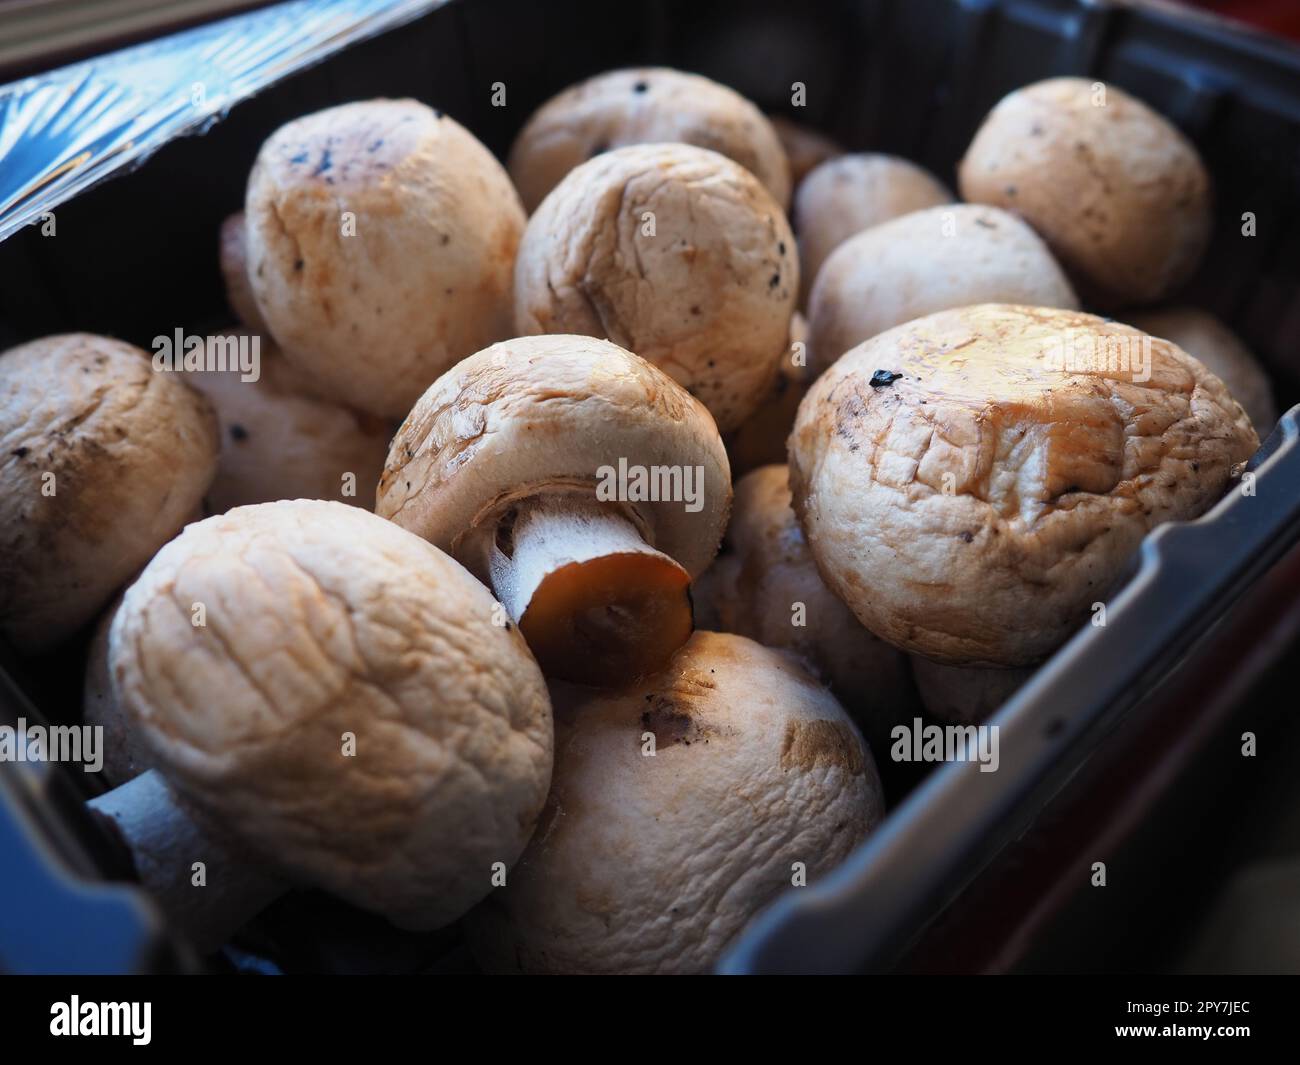 https://c8.alamy.com/comp/2PY7JEC/champignons-in-black-plastic-packaging-brown-champignons-grown-in-a-mushroom-factory-mushrooms-in-an-opened-store-packaging-closeup-of-mushrooms-after-defrosting-deformation-and-loss-of-elasticity-2PY7JEC.jpg